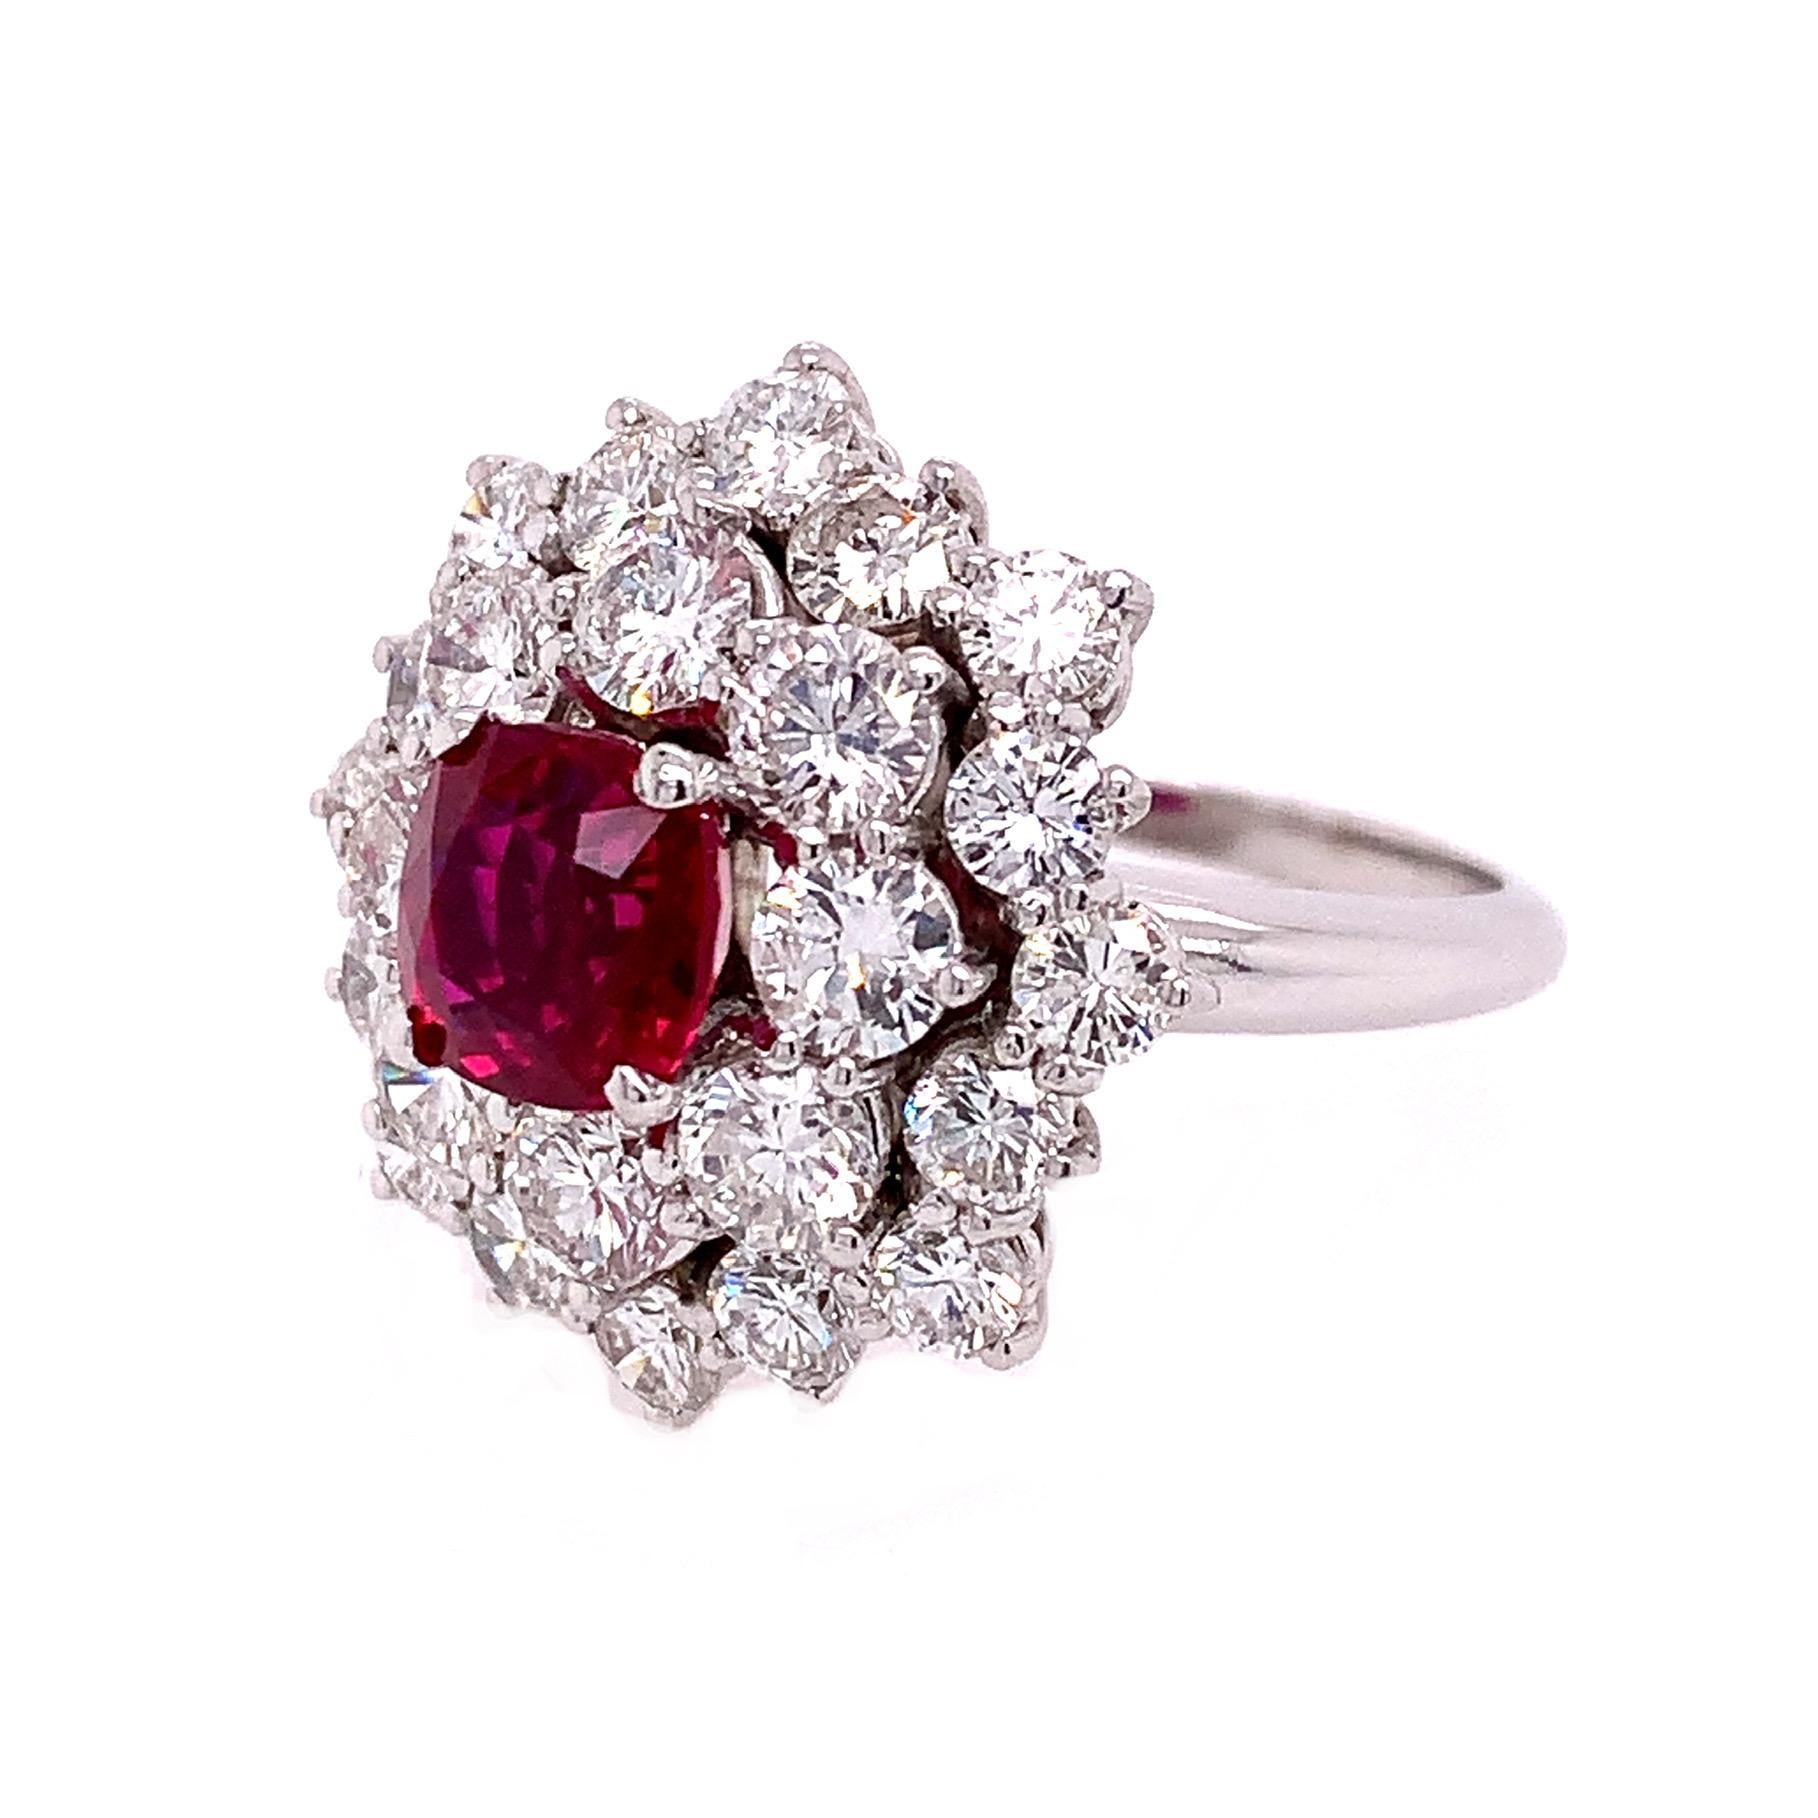 18K White Gold
Ruby: 2.05ct total weight.
Diamond: 24 stones - 3.00ct total weight.
All diamonds are G-H/SI stones.
U.S size 6.25. 
